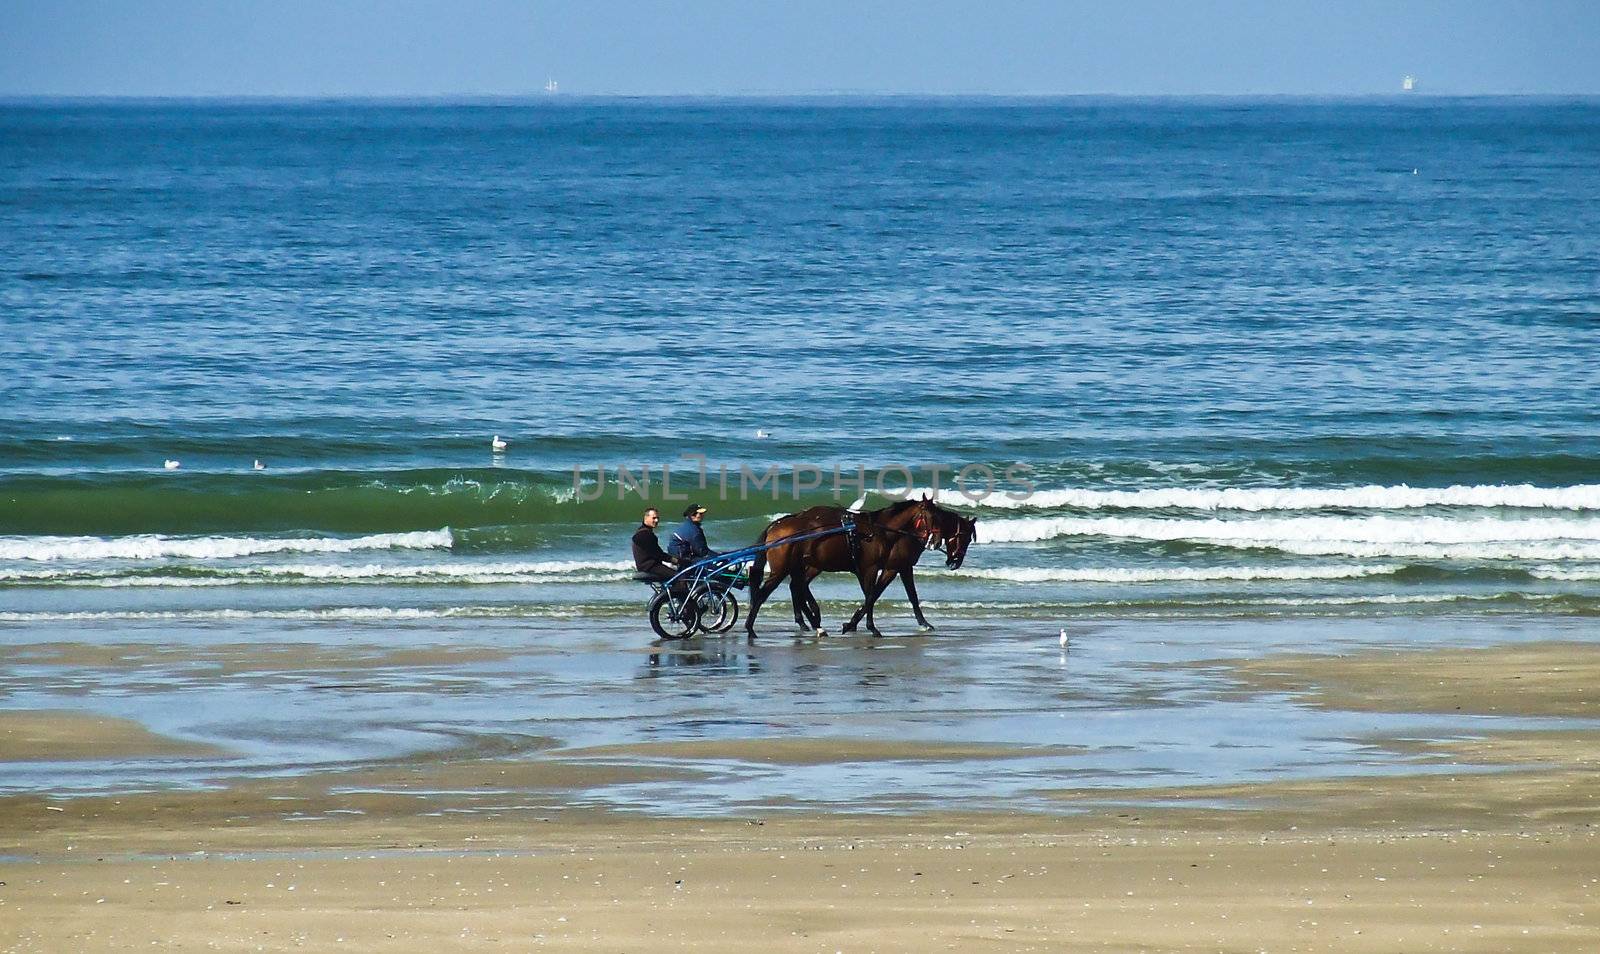 Horses pulling a carriage on Juno beach by fabriziopiria